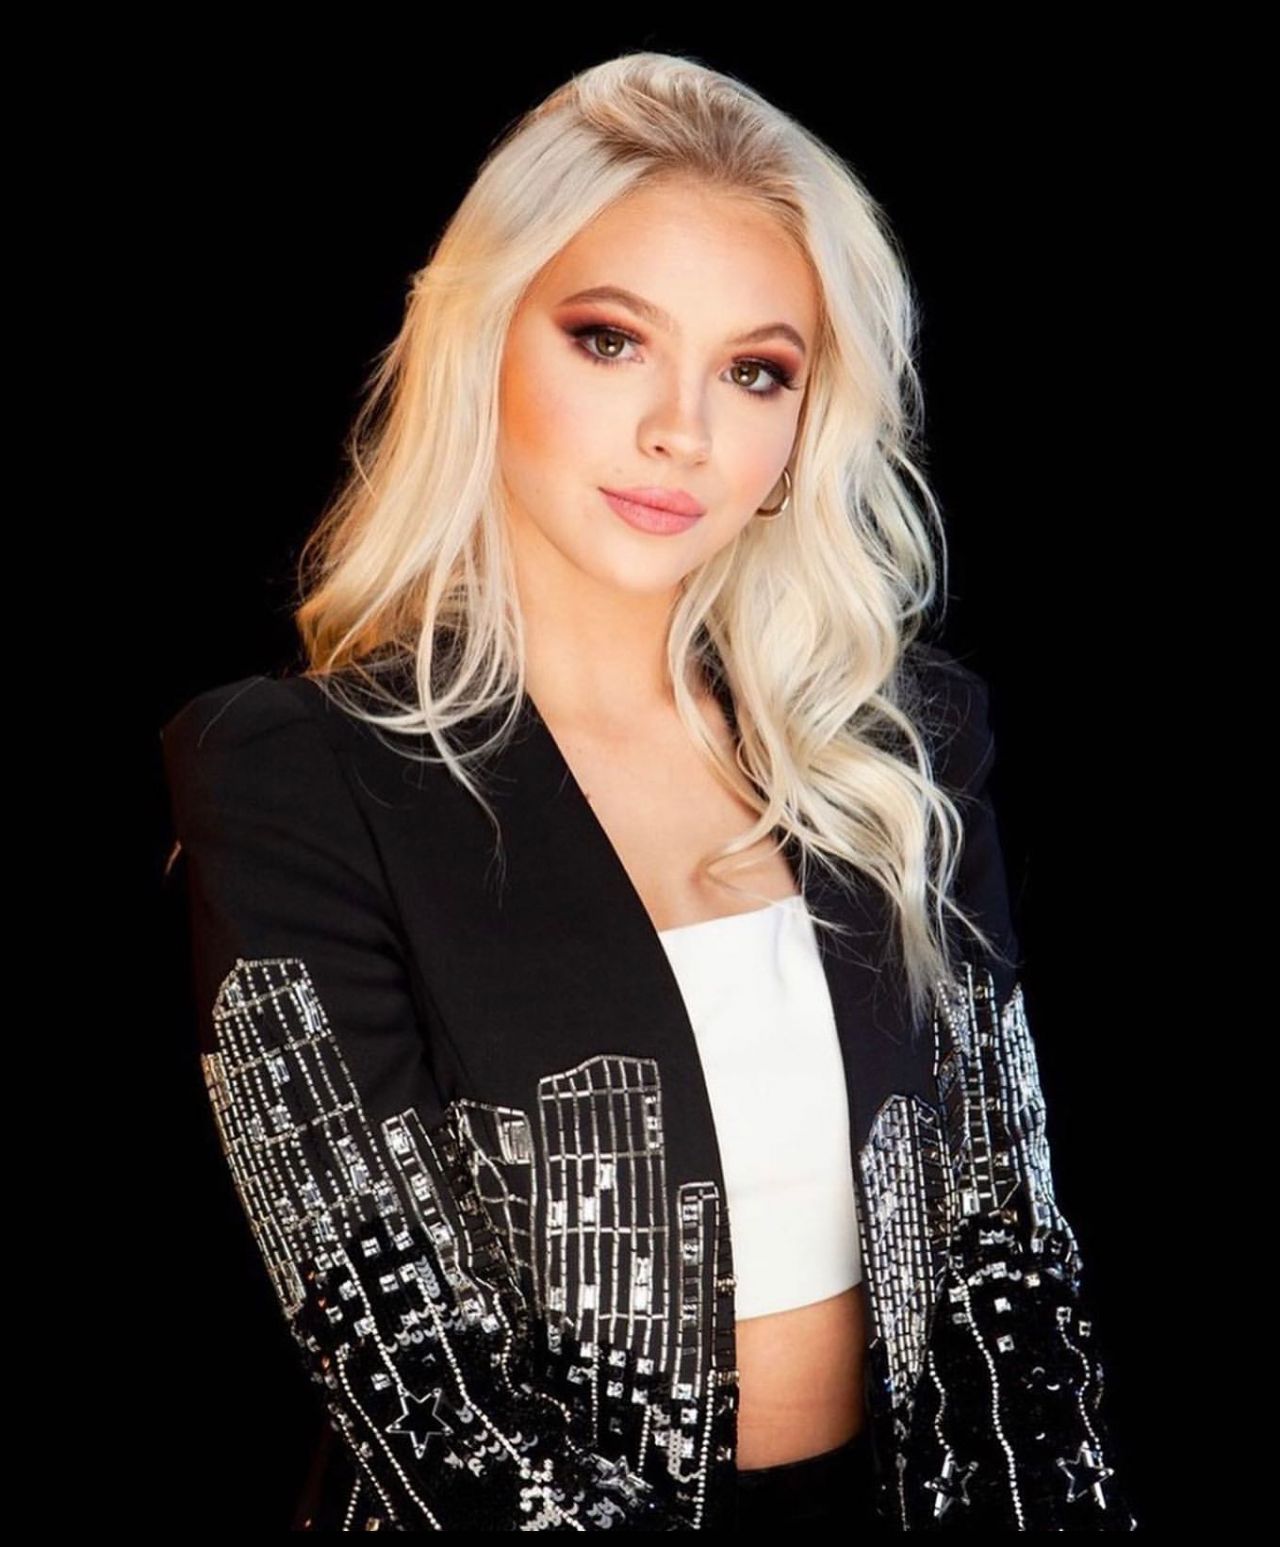 Jordyn Jones Style Clothes Outfits And Fashion Page 12 Of 39 Celebmafia